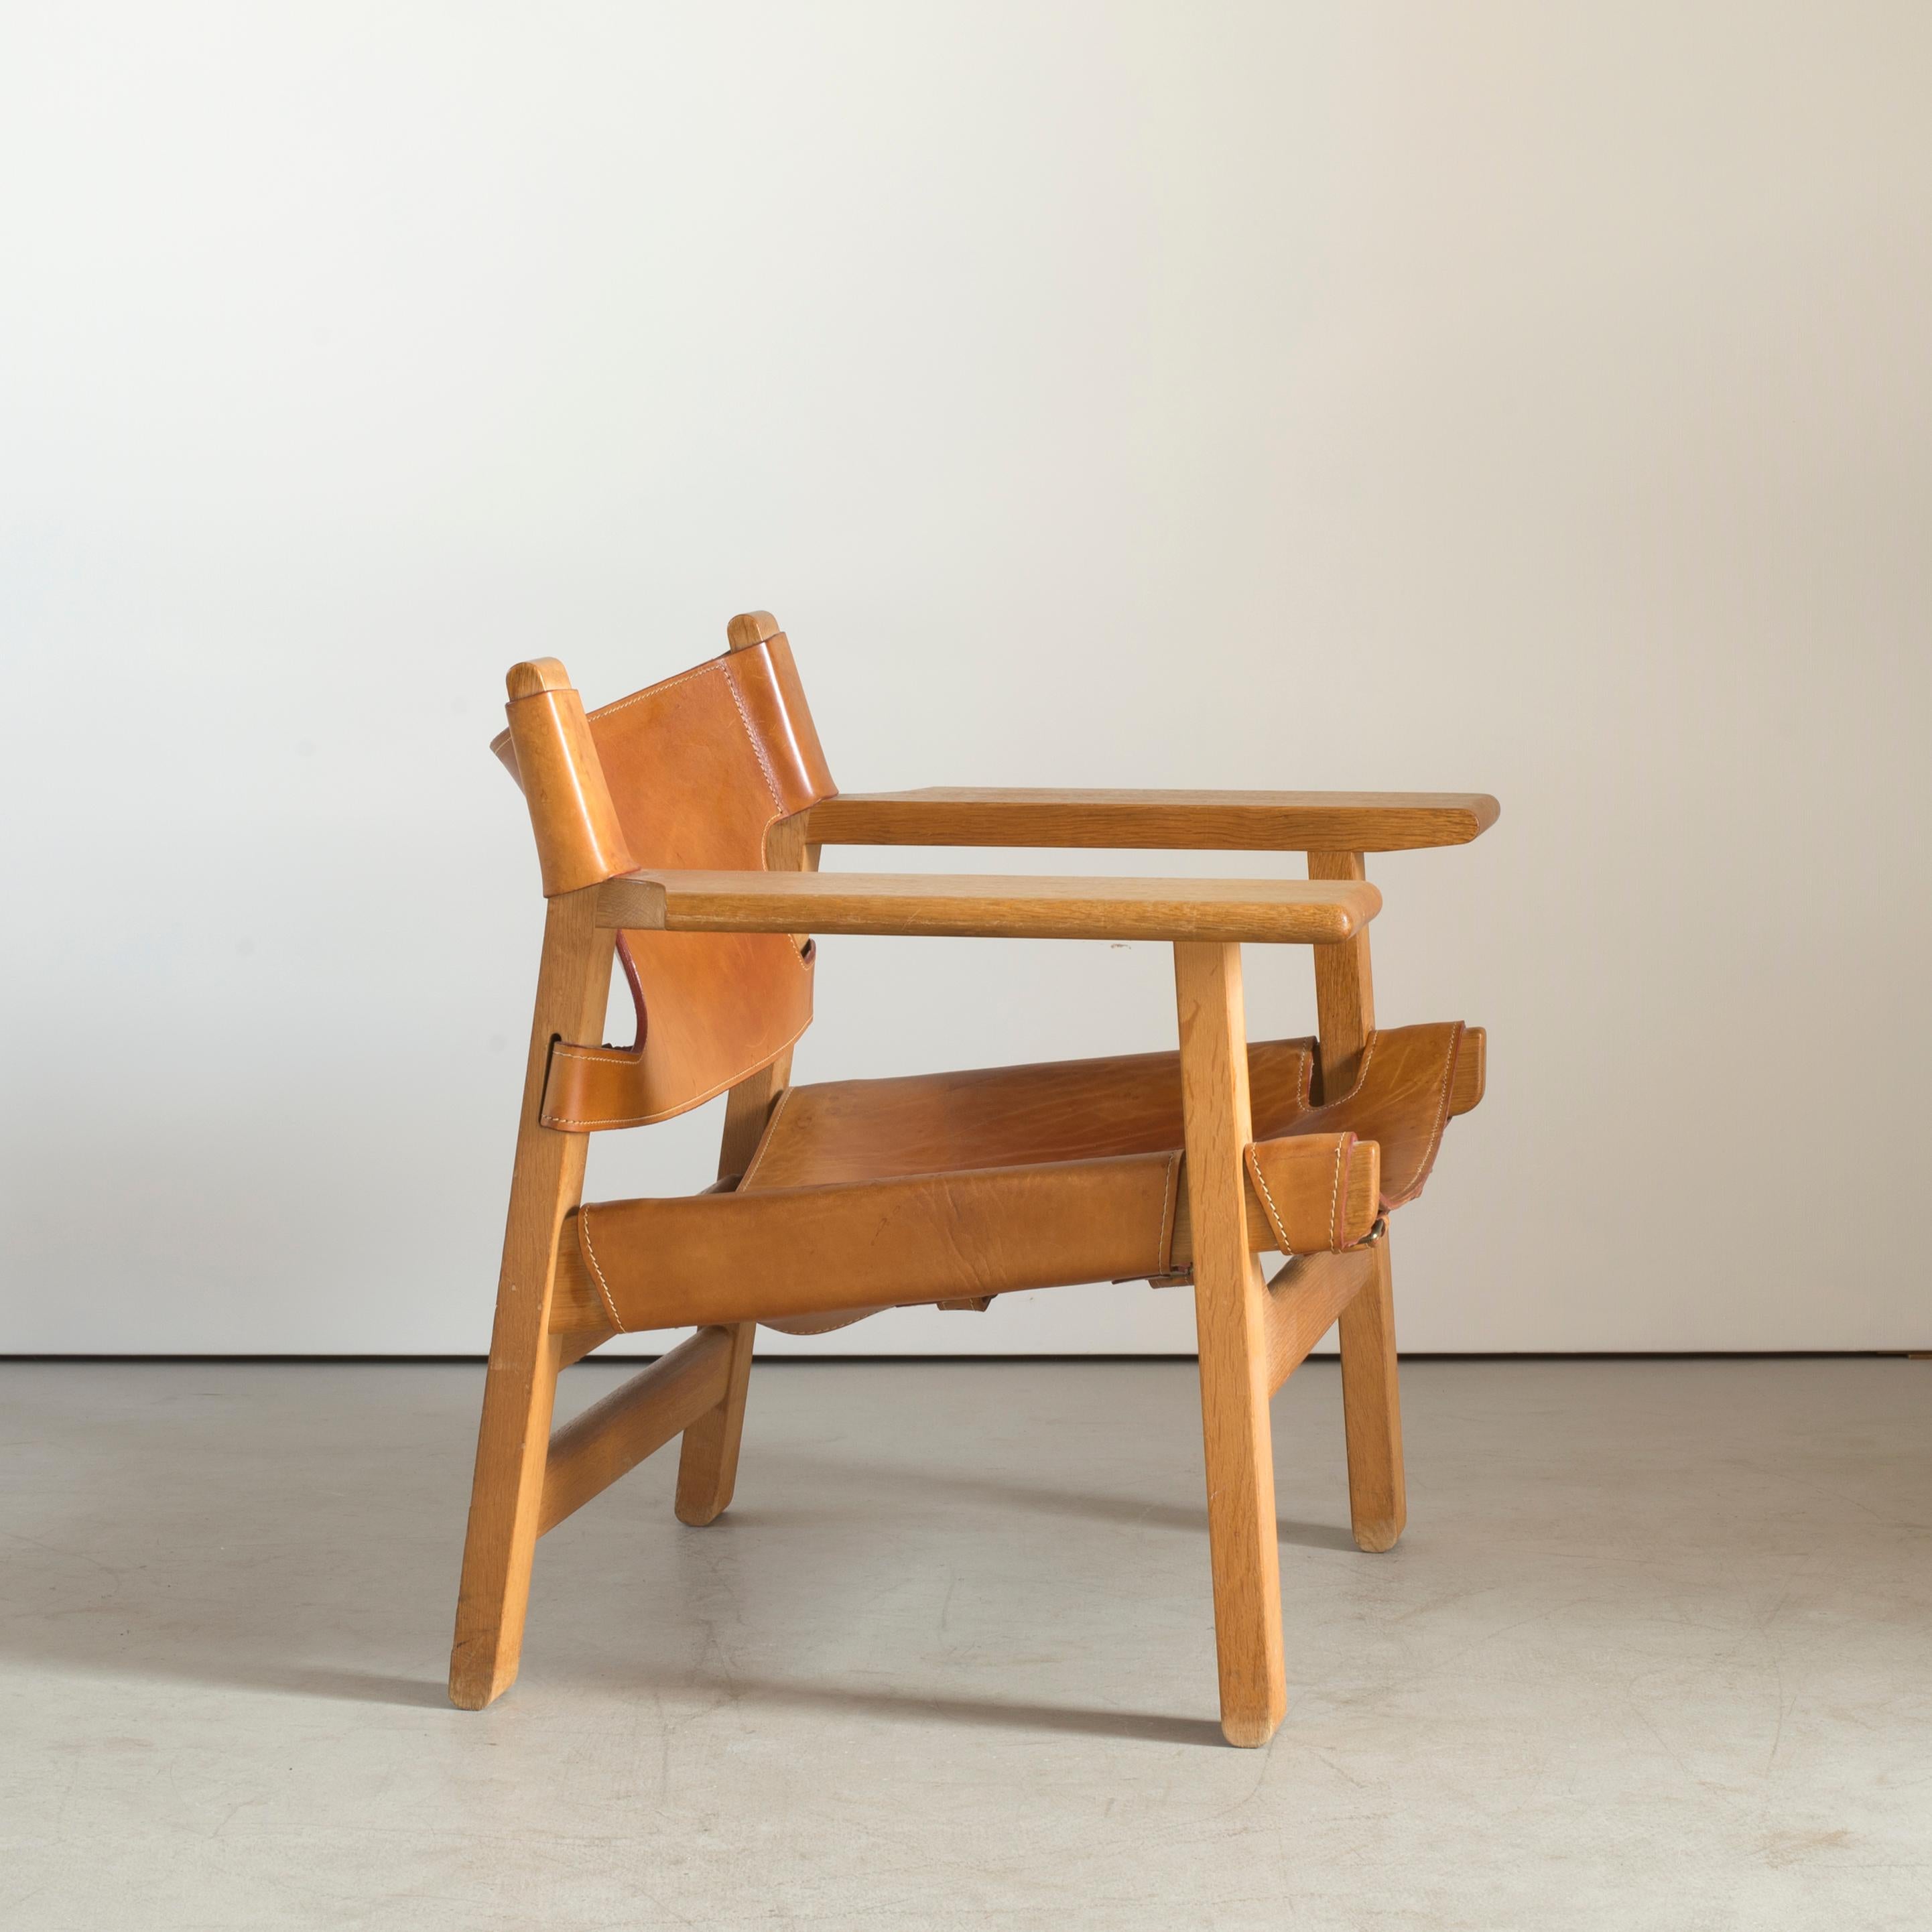 Børge Mogensen Spanish chair in oak and vegetable tanned leather. Executed by Fredericia Furniture, Denmark.